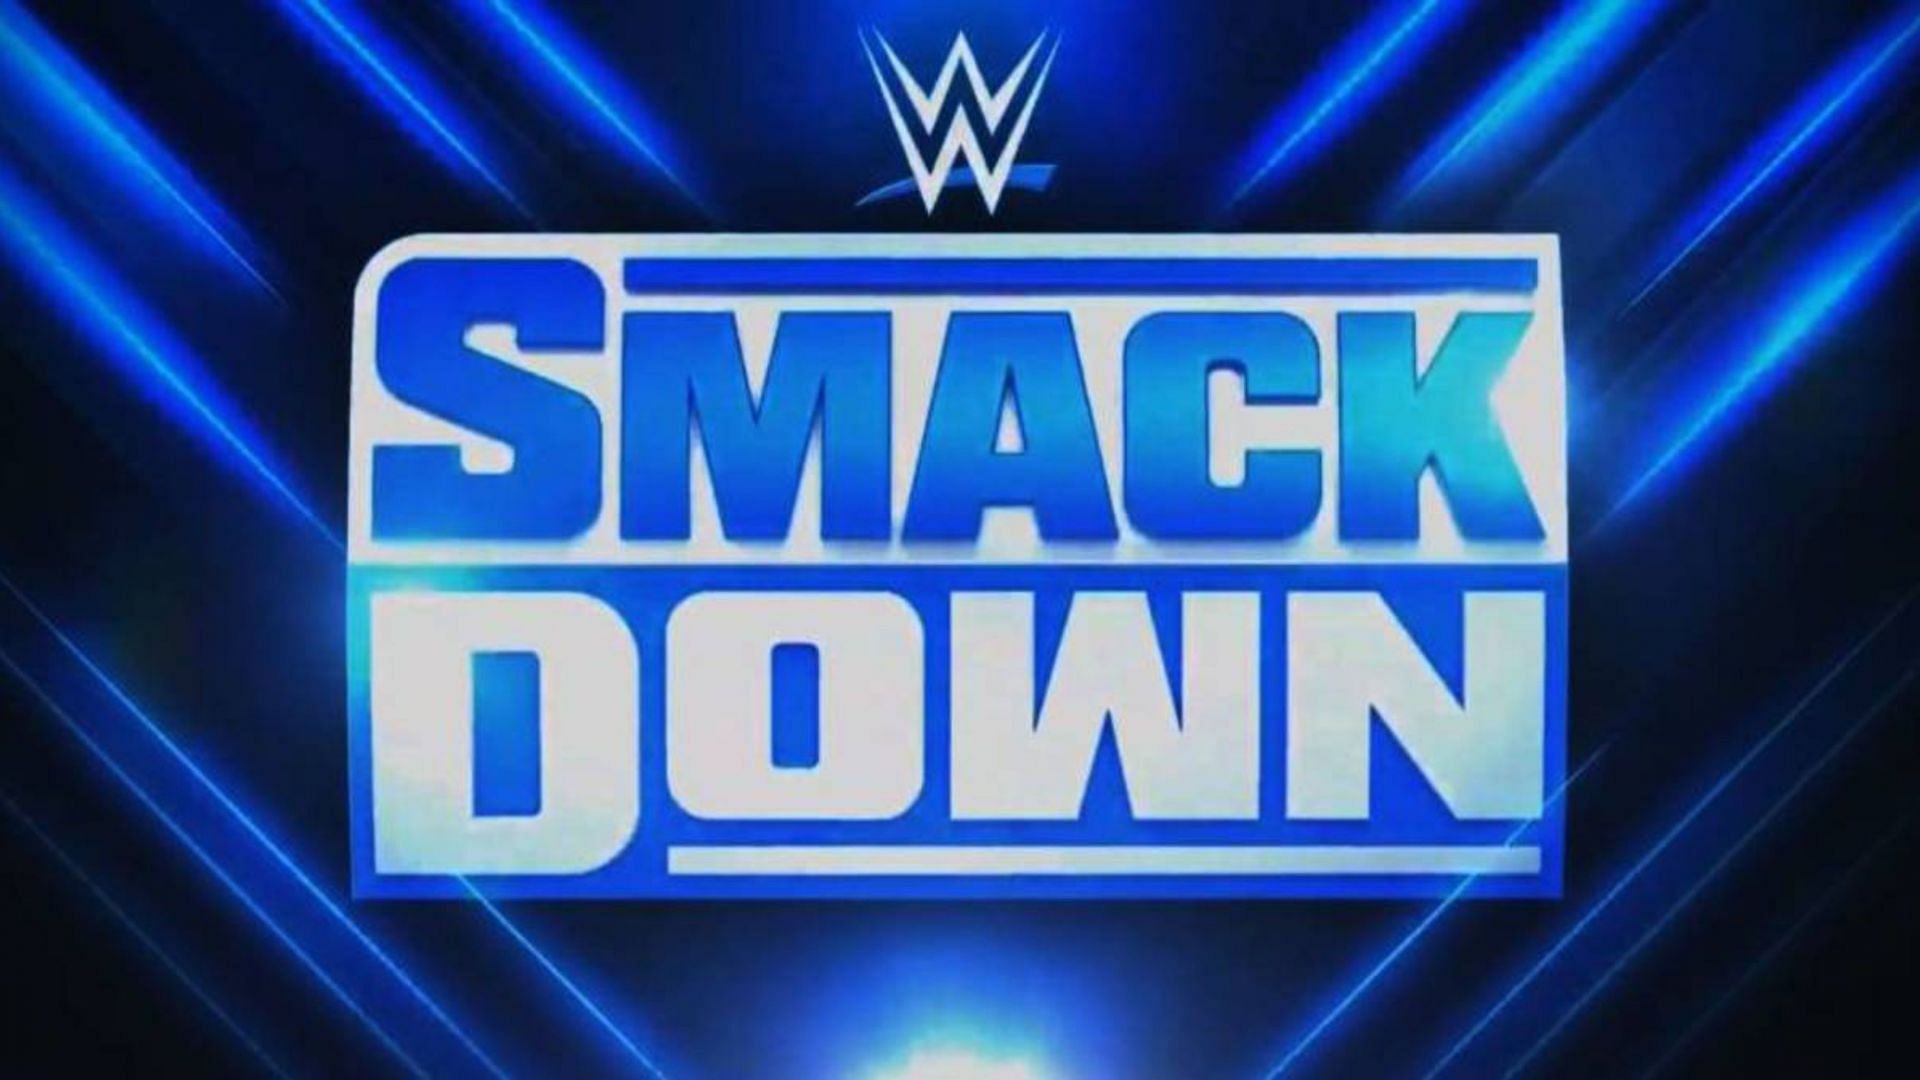 Drew McIntyre is currently active on WWE SmackDown